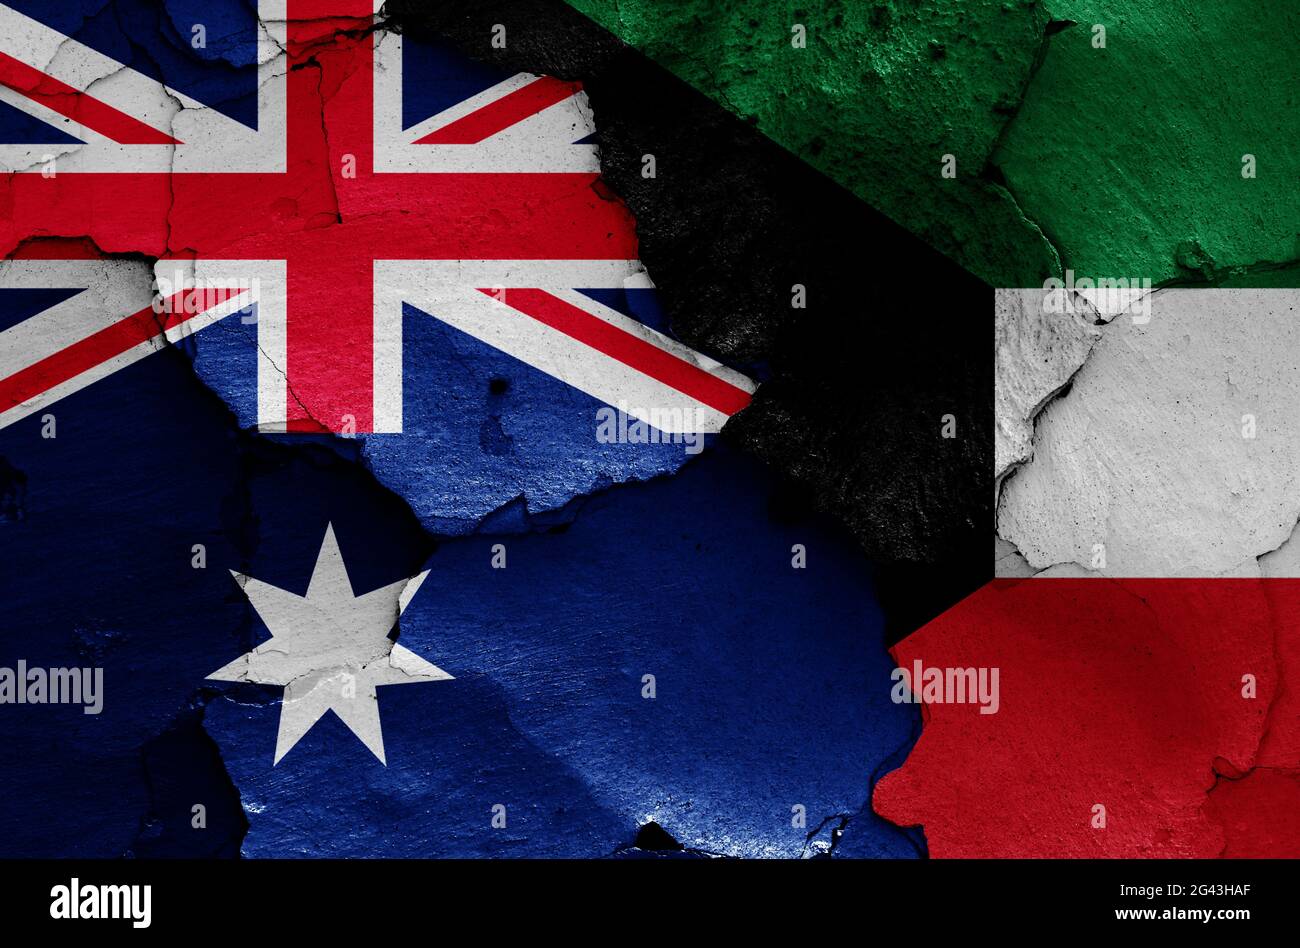 Flags of Australia and Kuwait painted on cracked wall Stock Photo